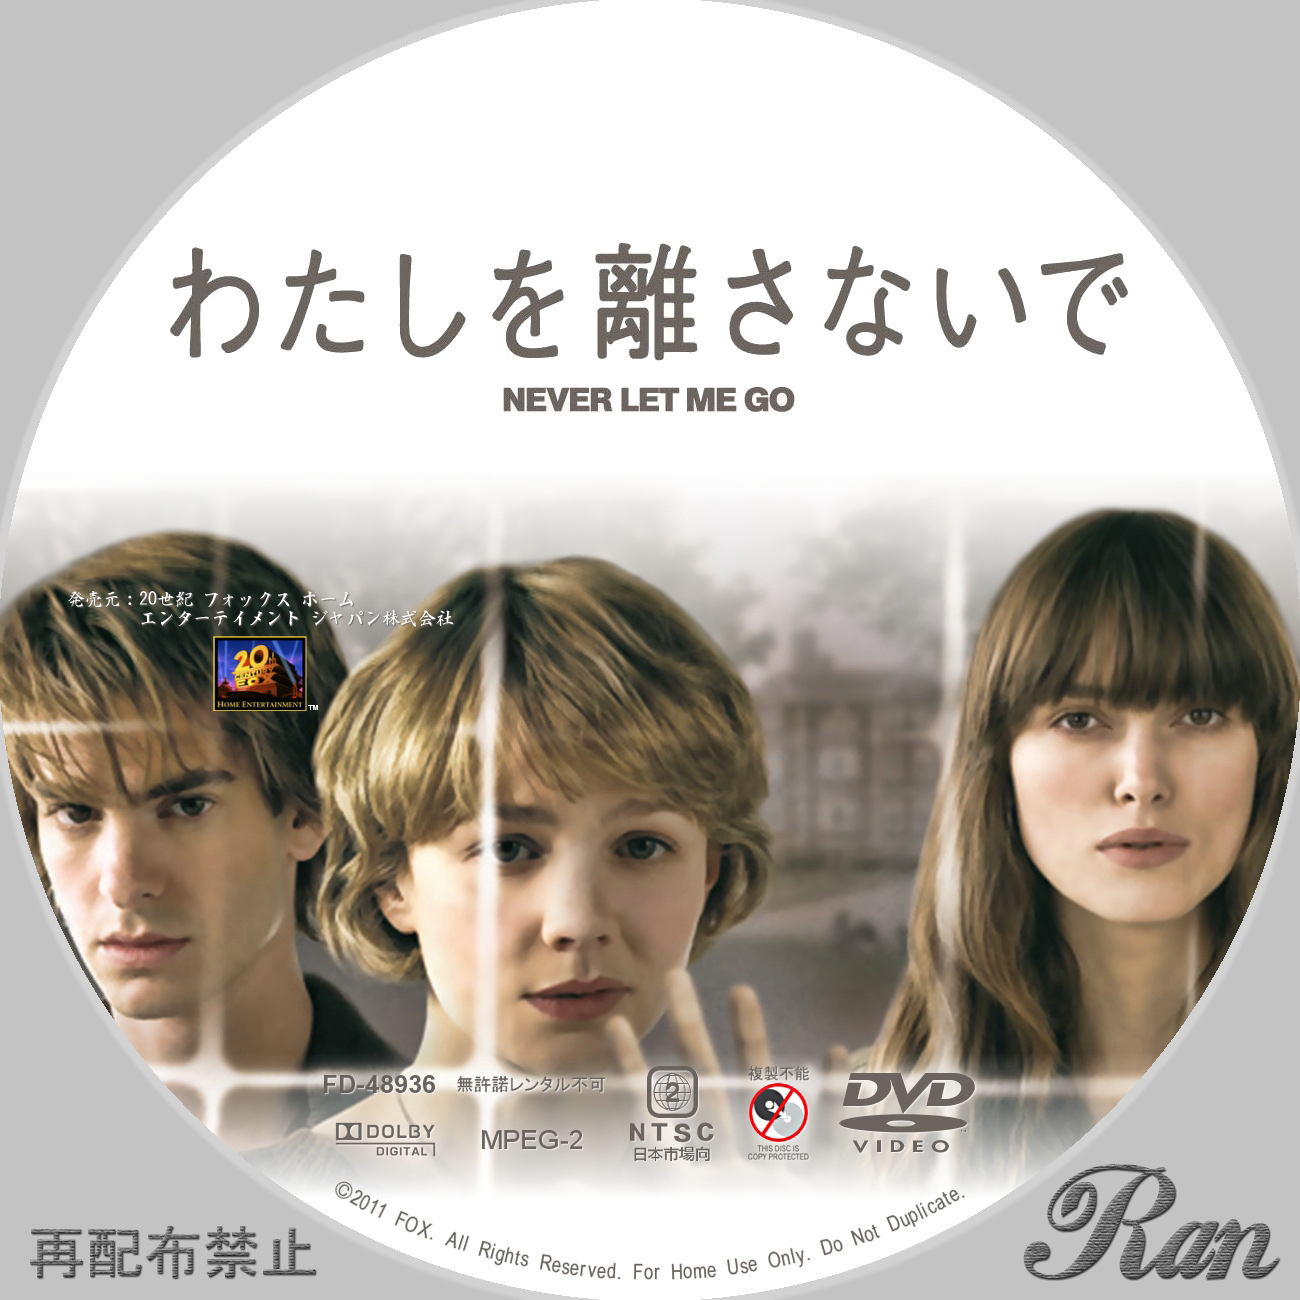 Be Fond of the Movies わたしを離さないで（原題：Never Let Me Go）